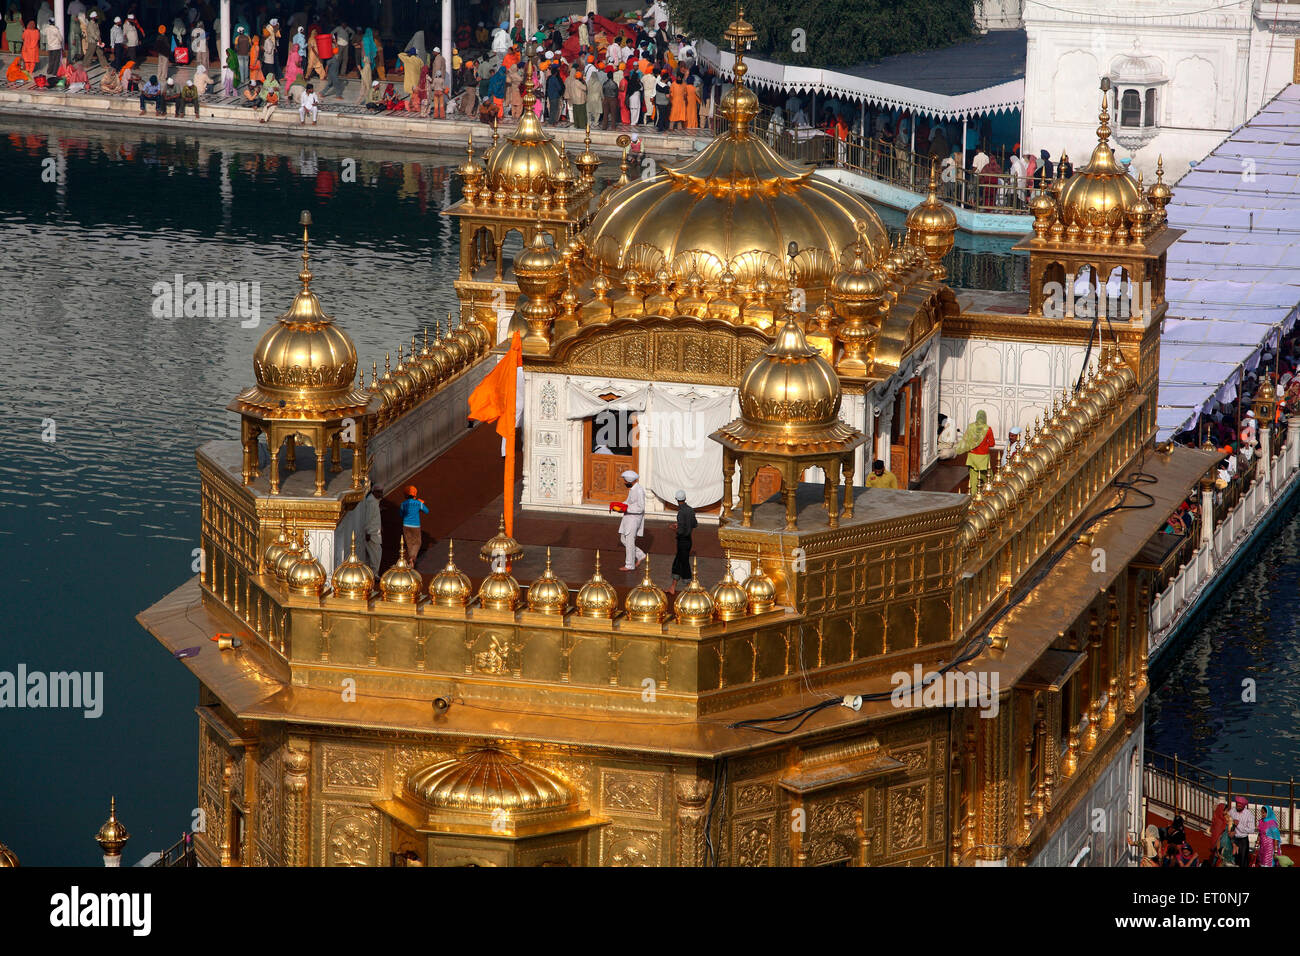 Close view of top of Harmandir Sahib or Darbar Sahib or Golden temple surrounded by lake in Amritsar ; Punjab ; India Stock Photo